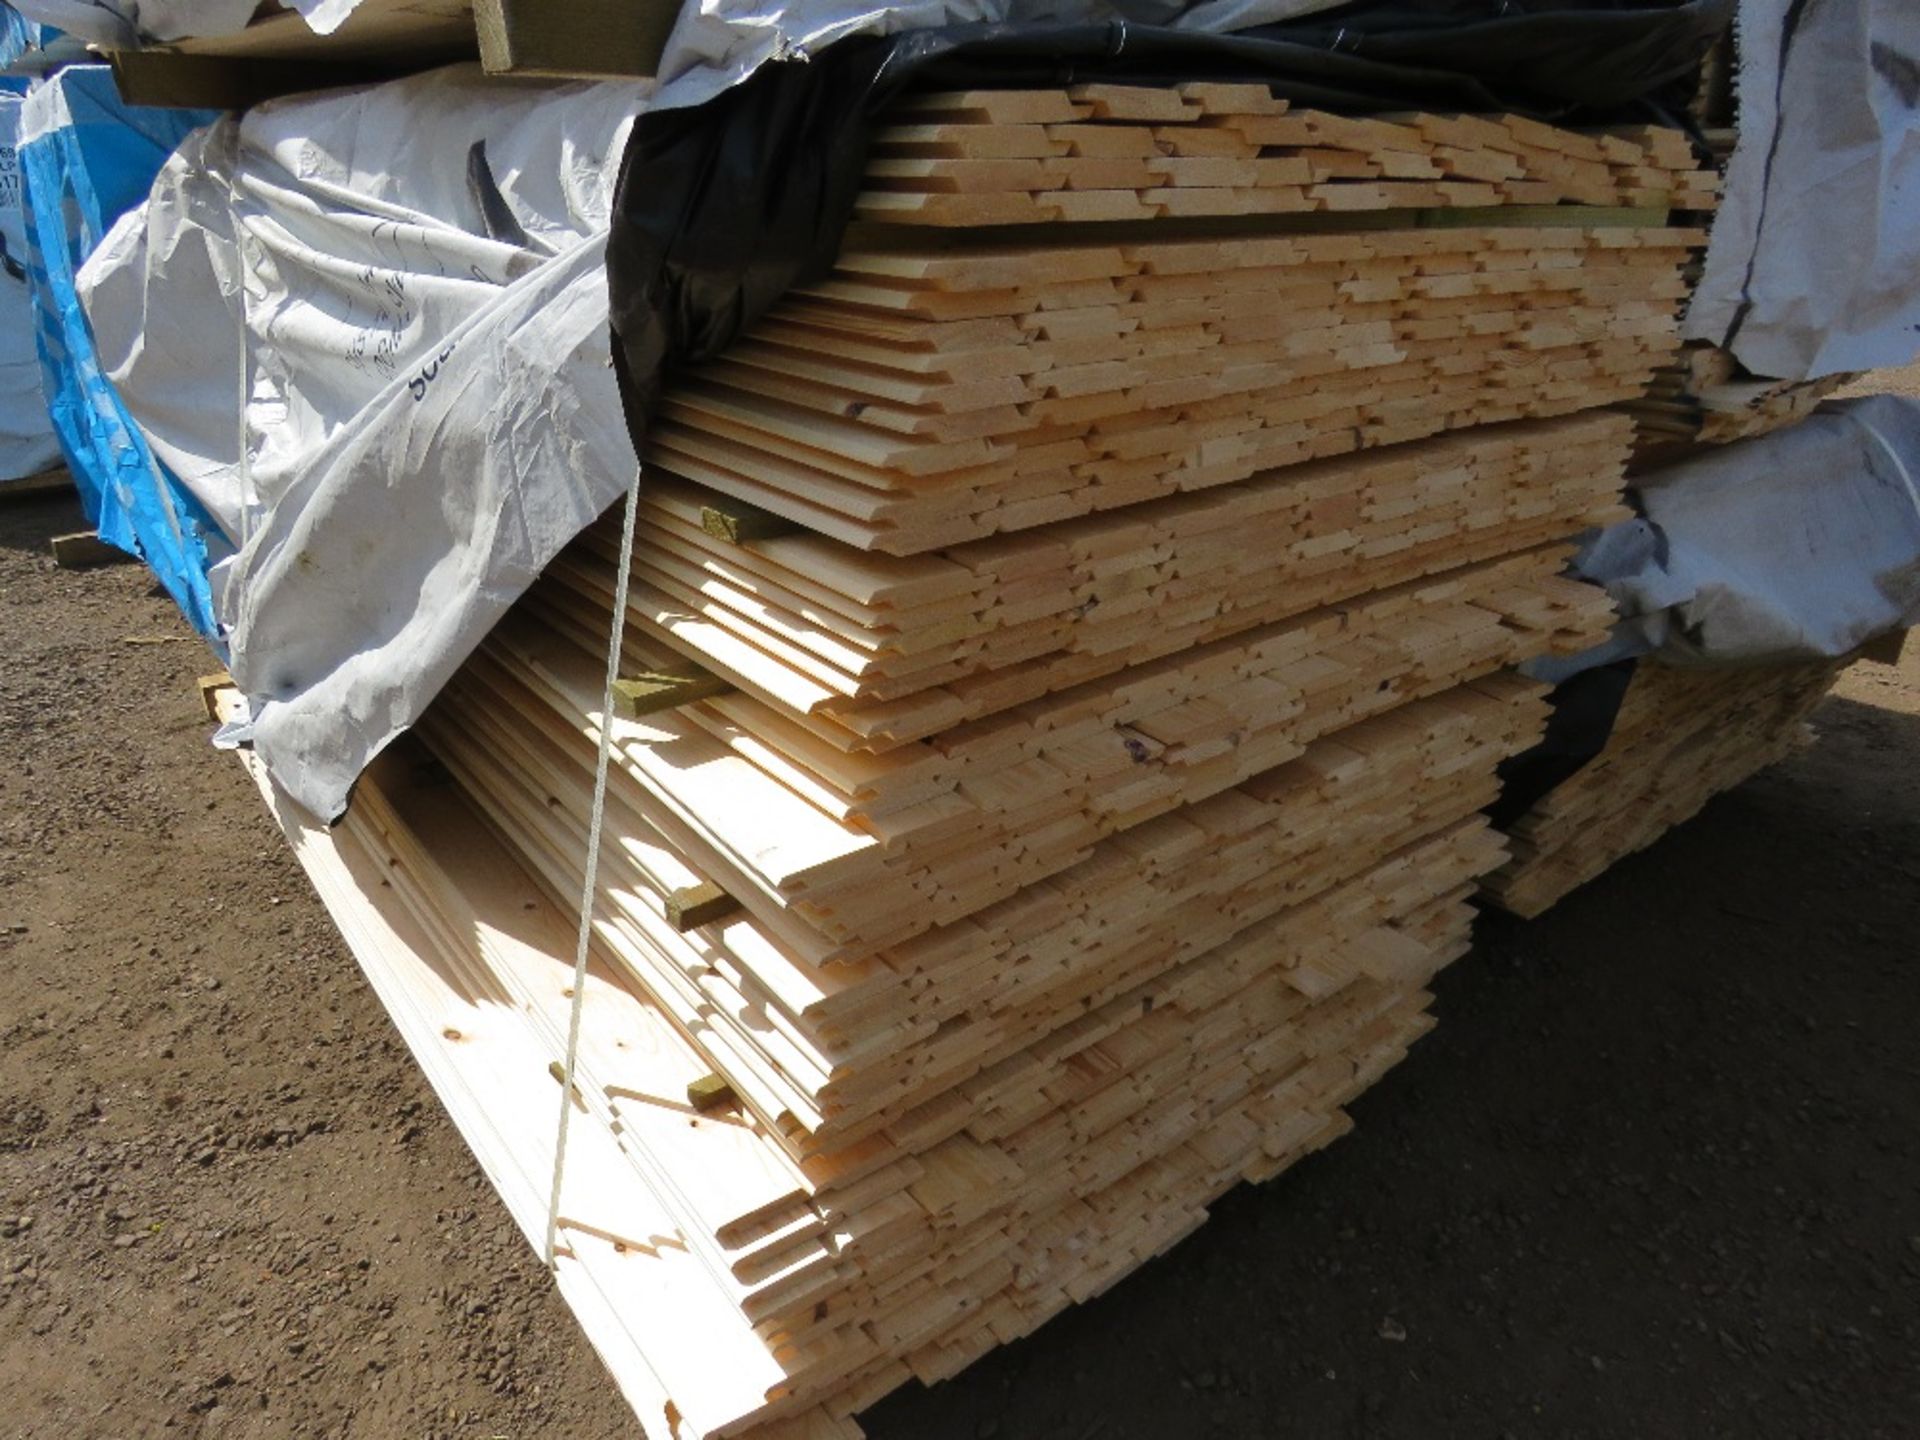 2 X PACKS OF UNTREATED SHIPLAP TYPE TIMBER CLADDING BOARDS: 1.73M X 100MM APPROX. - Image 4 of 6